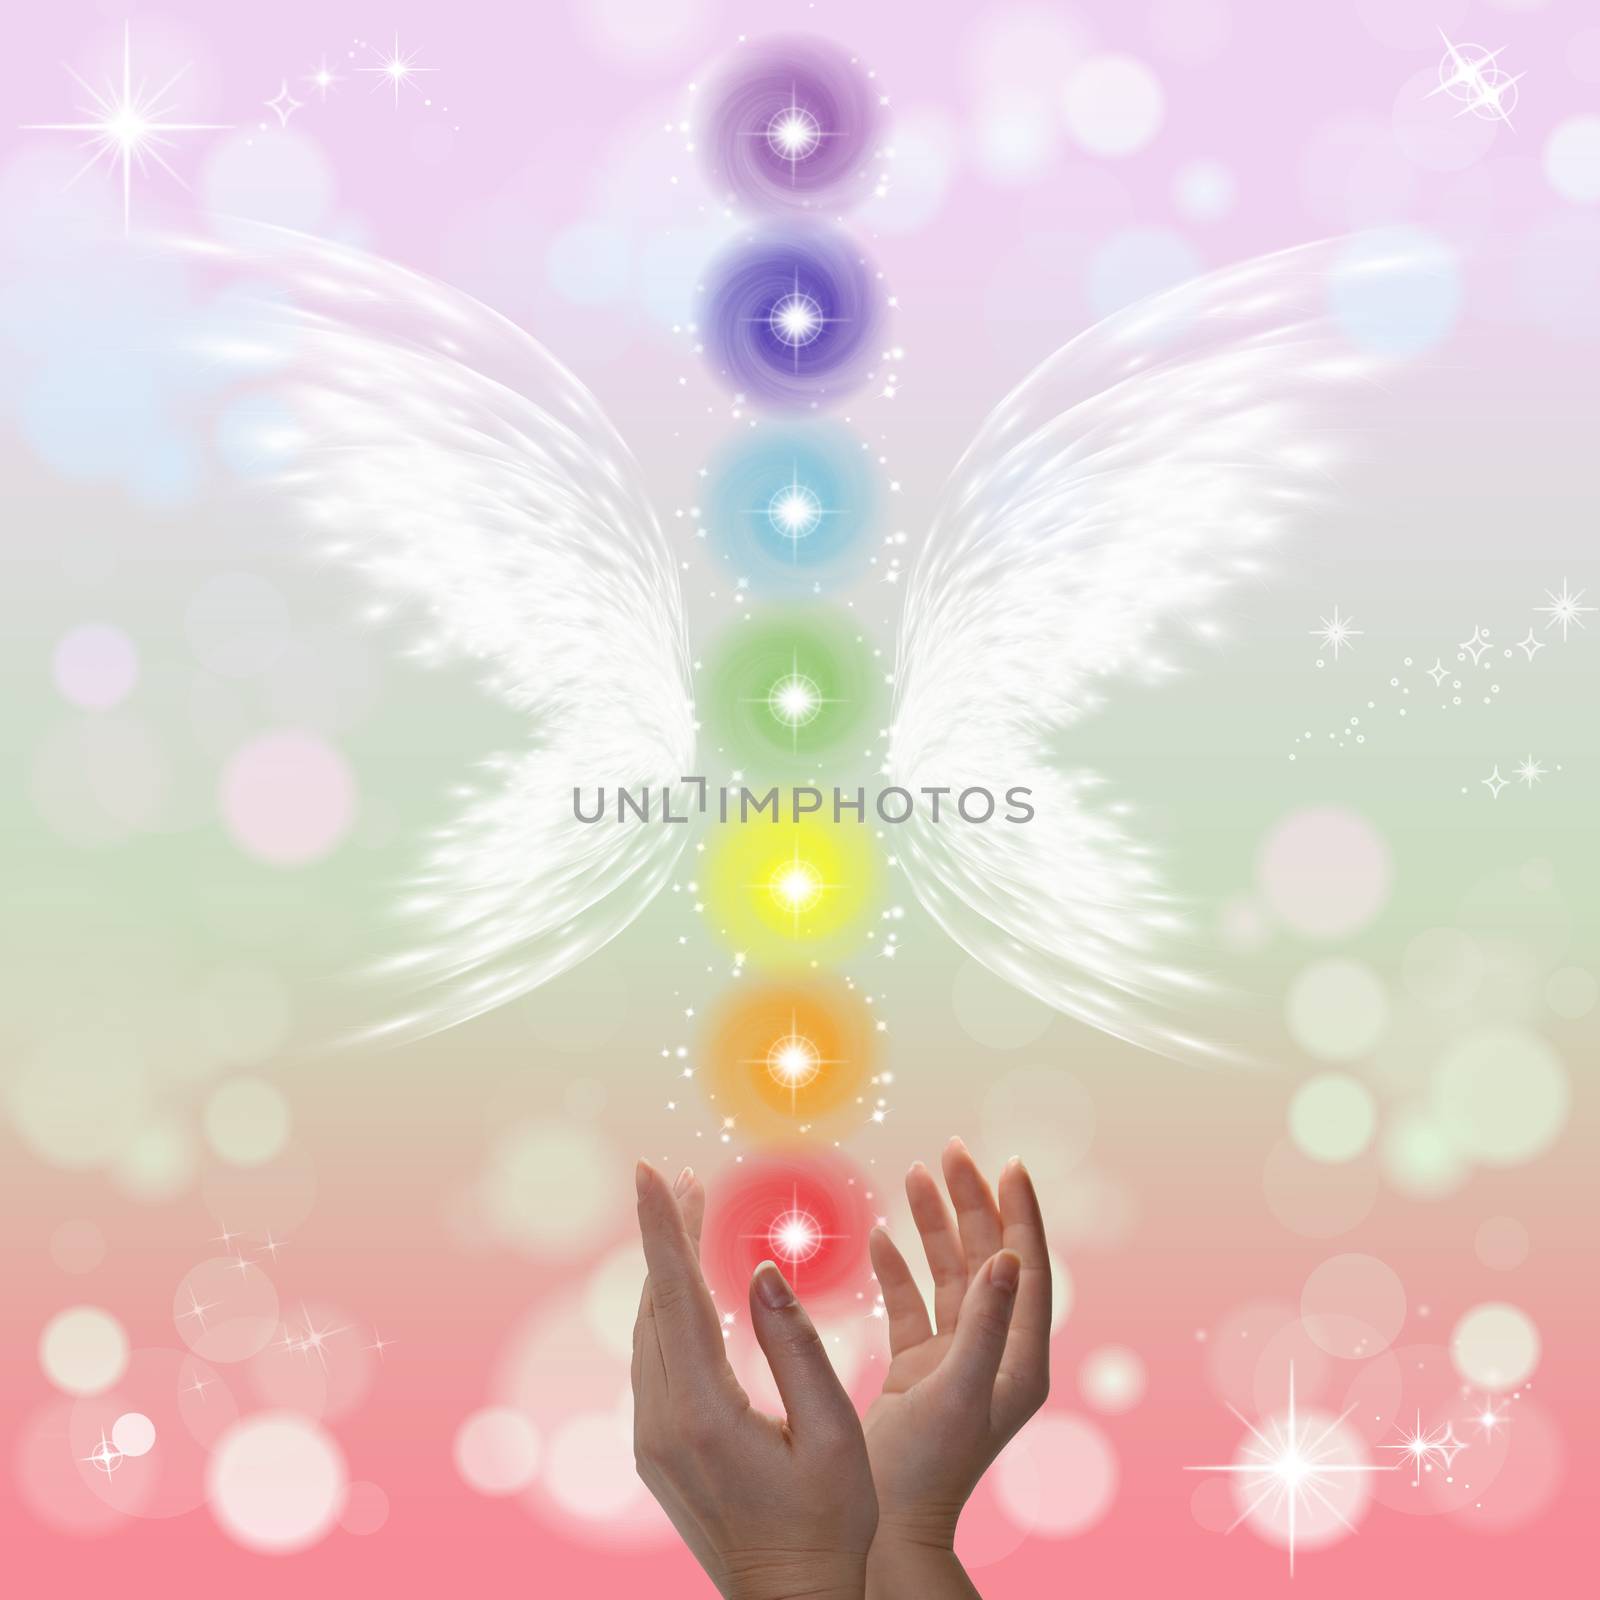 Healing Hands and seven chakras by stellar